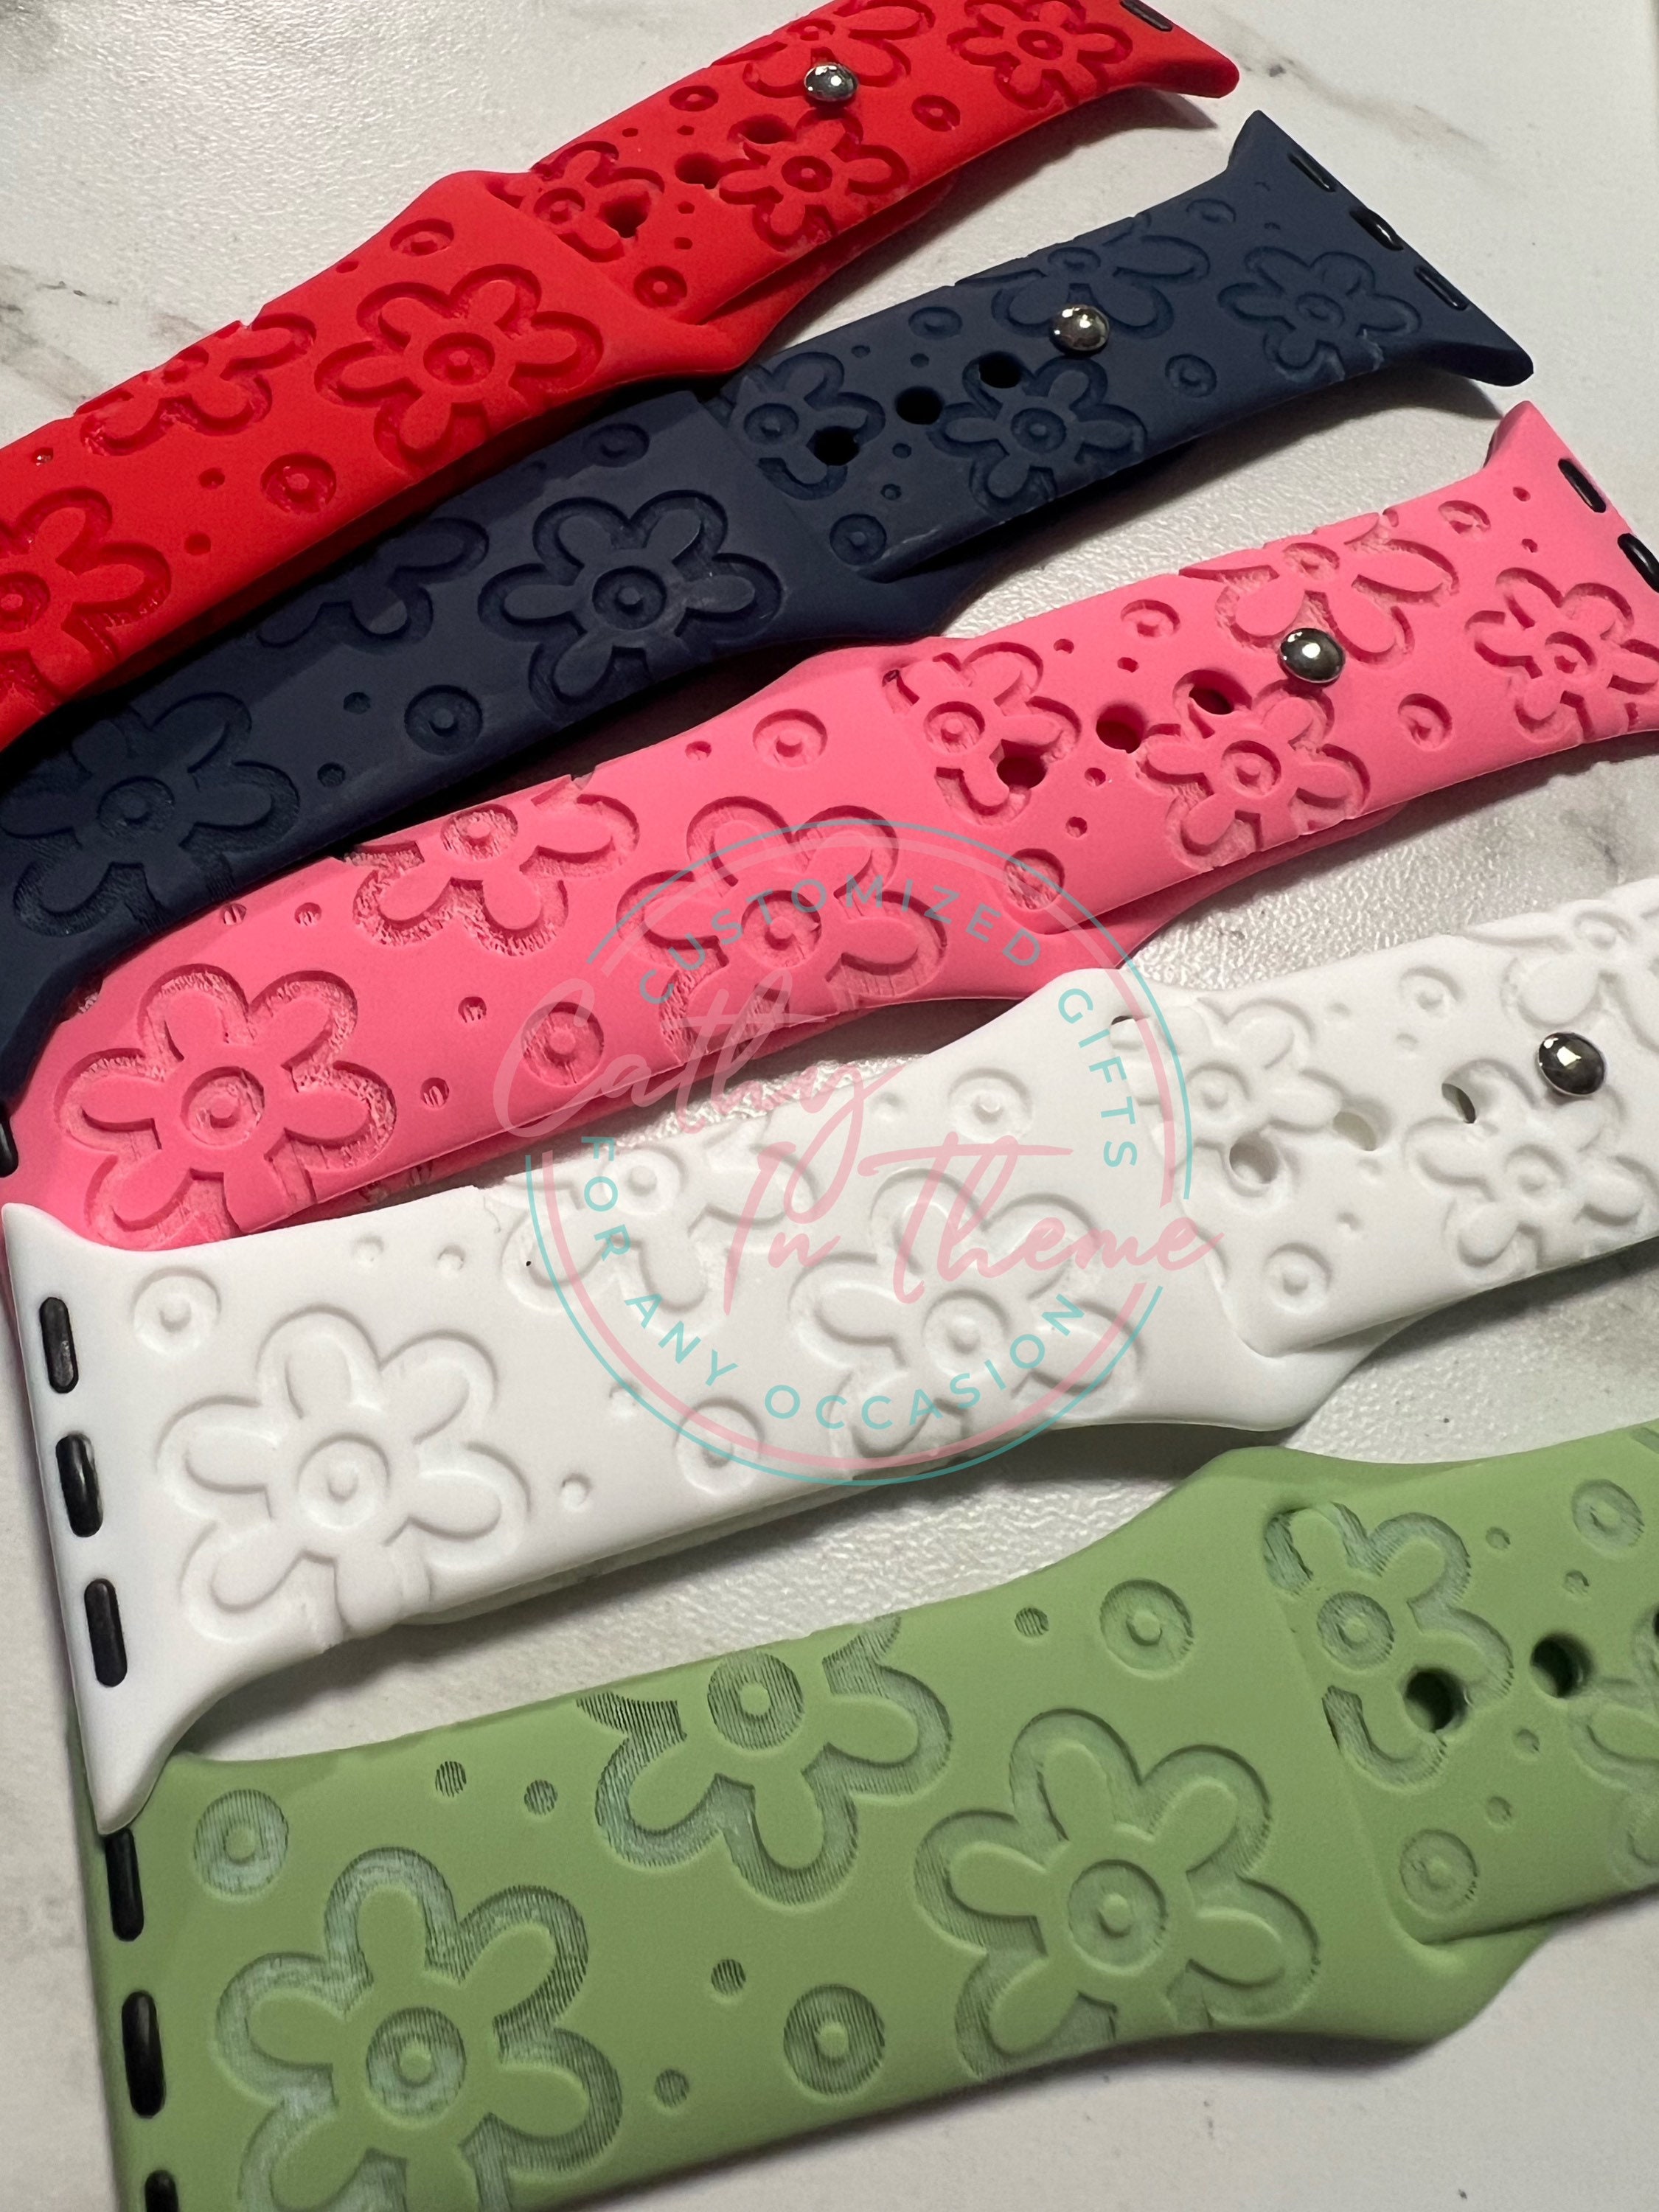 Wizard Themed Apple Watch Bands 